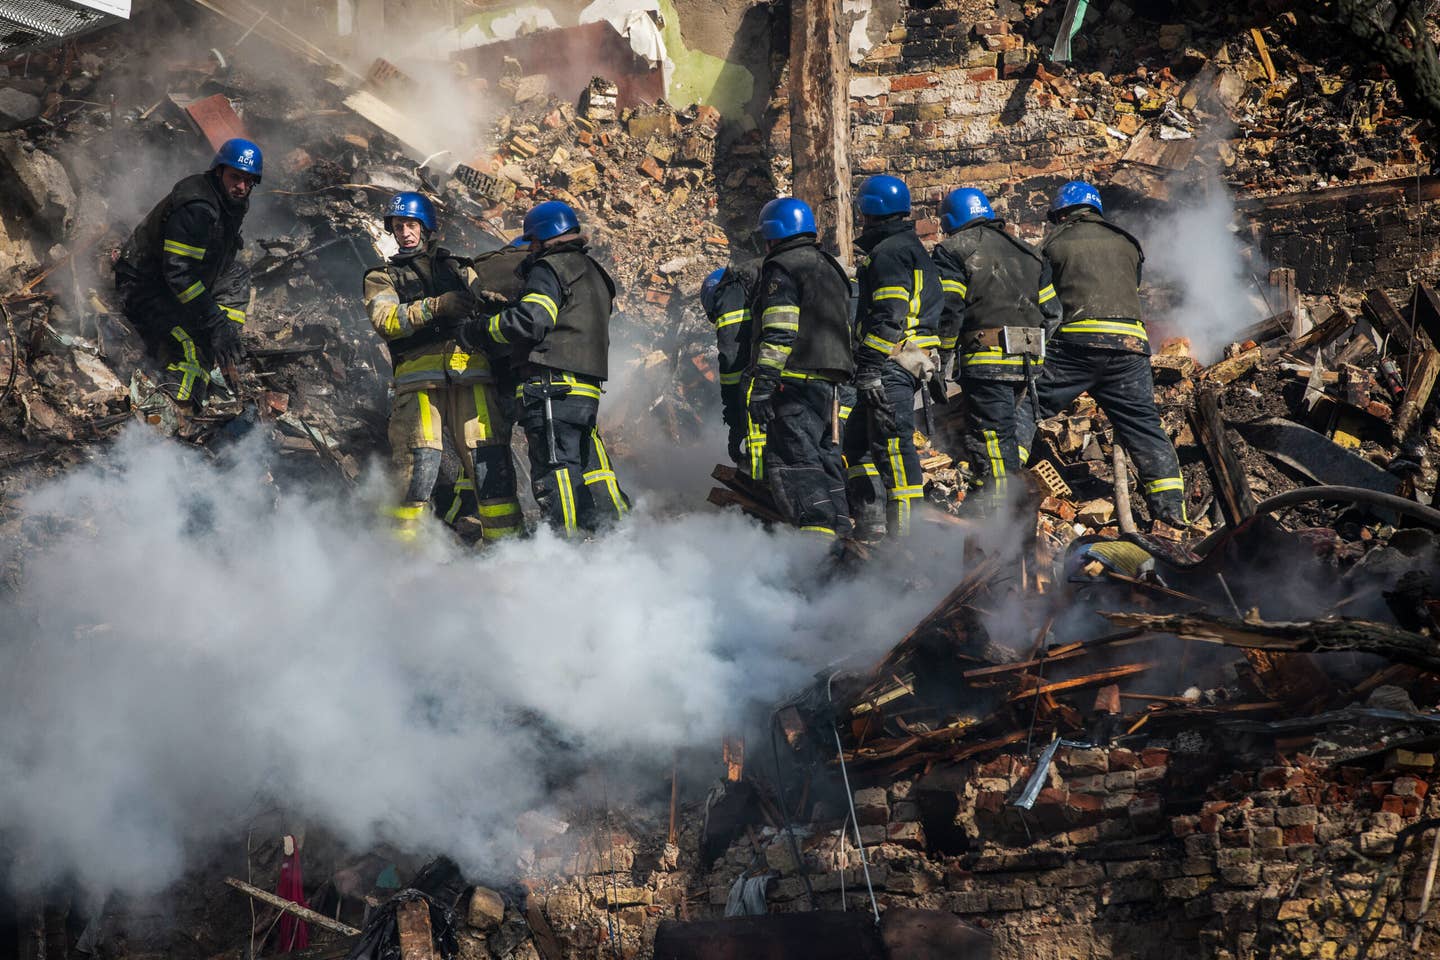 Ukrainian rescuers work at the site of a residential building in Kyiv destroyed by an Iranian-made Shahed-136 loitering munition. <em>Photo by Oleksii Chumachenko/SOPA Images/LightRocket via Getty Images</em>